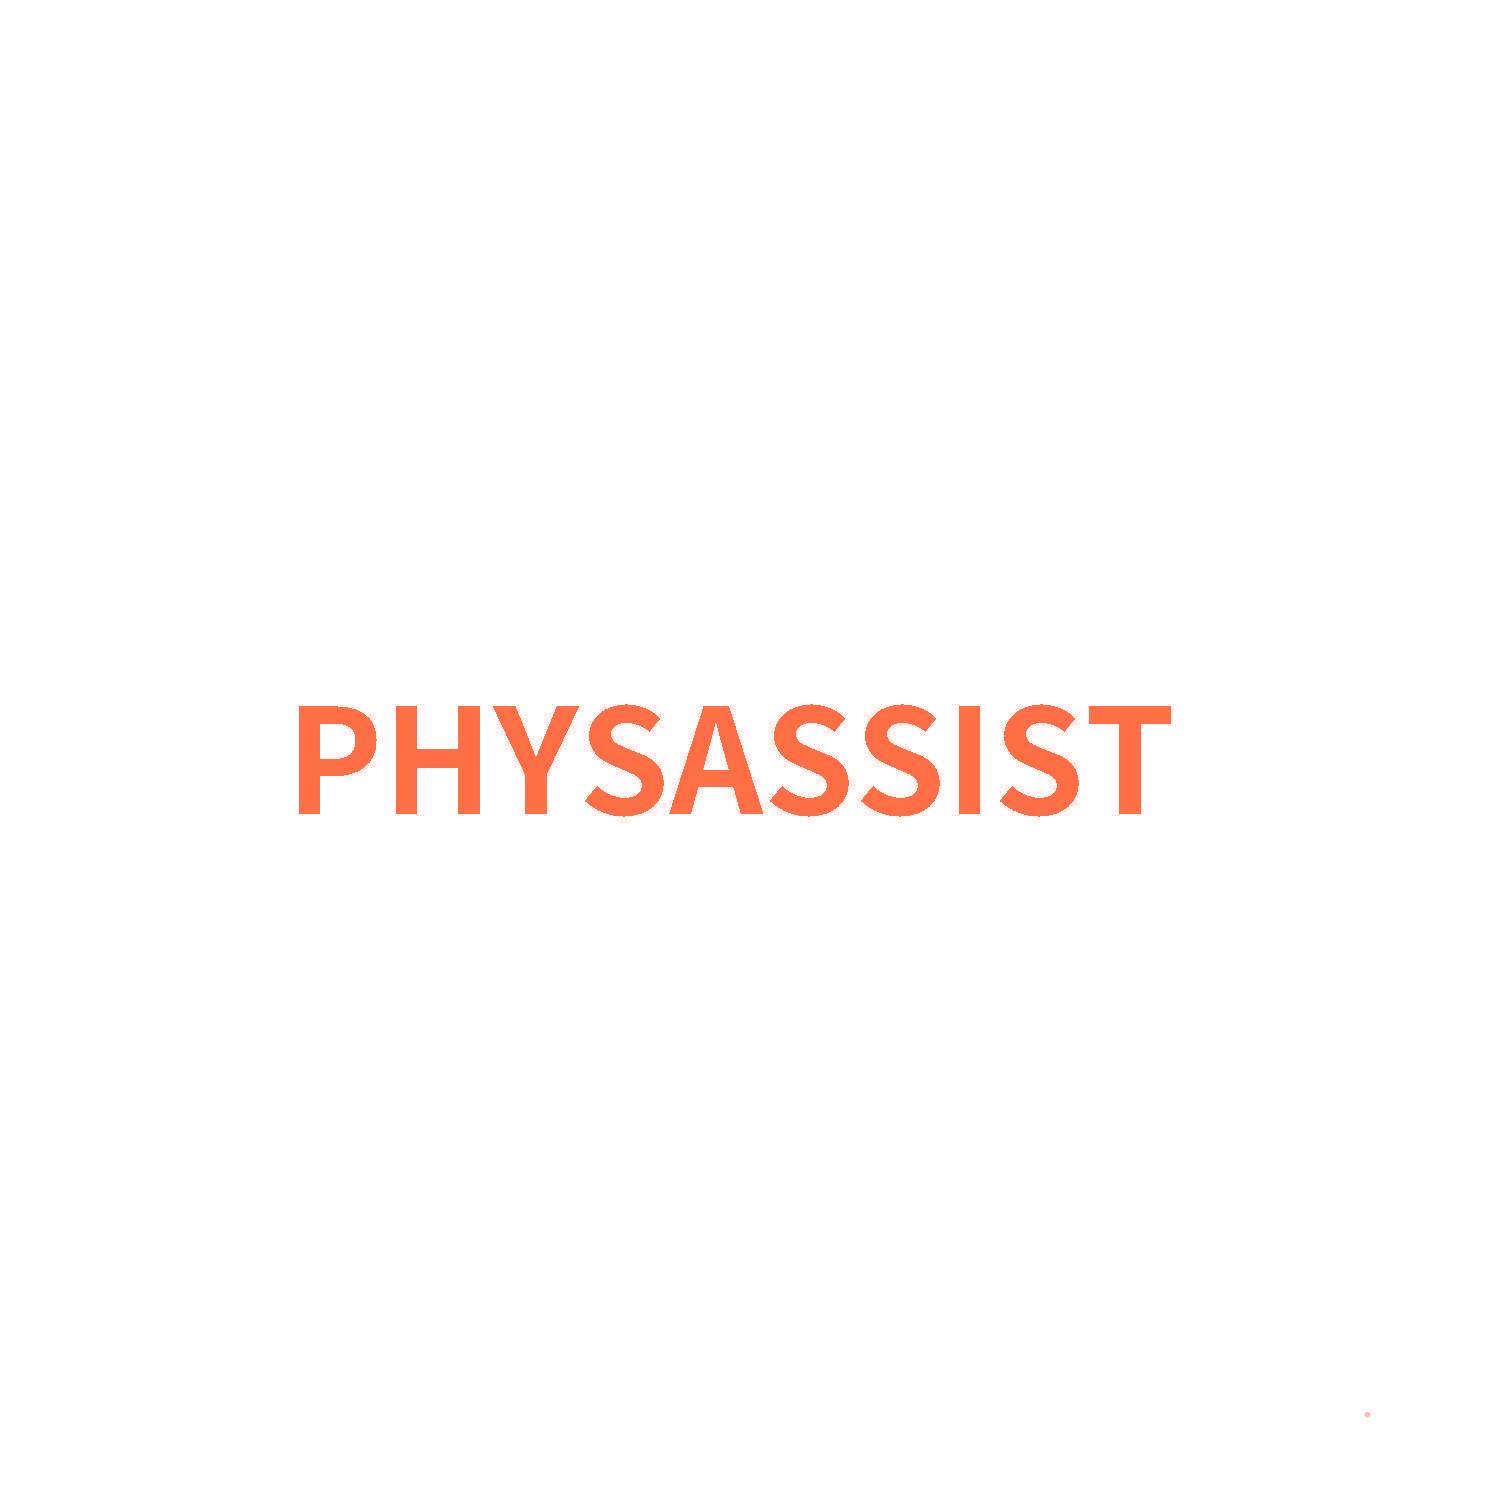 PHYSASSIST